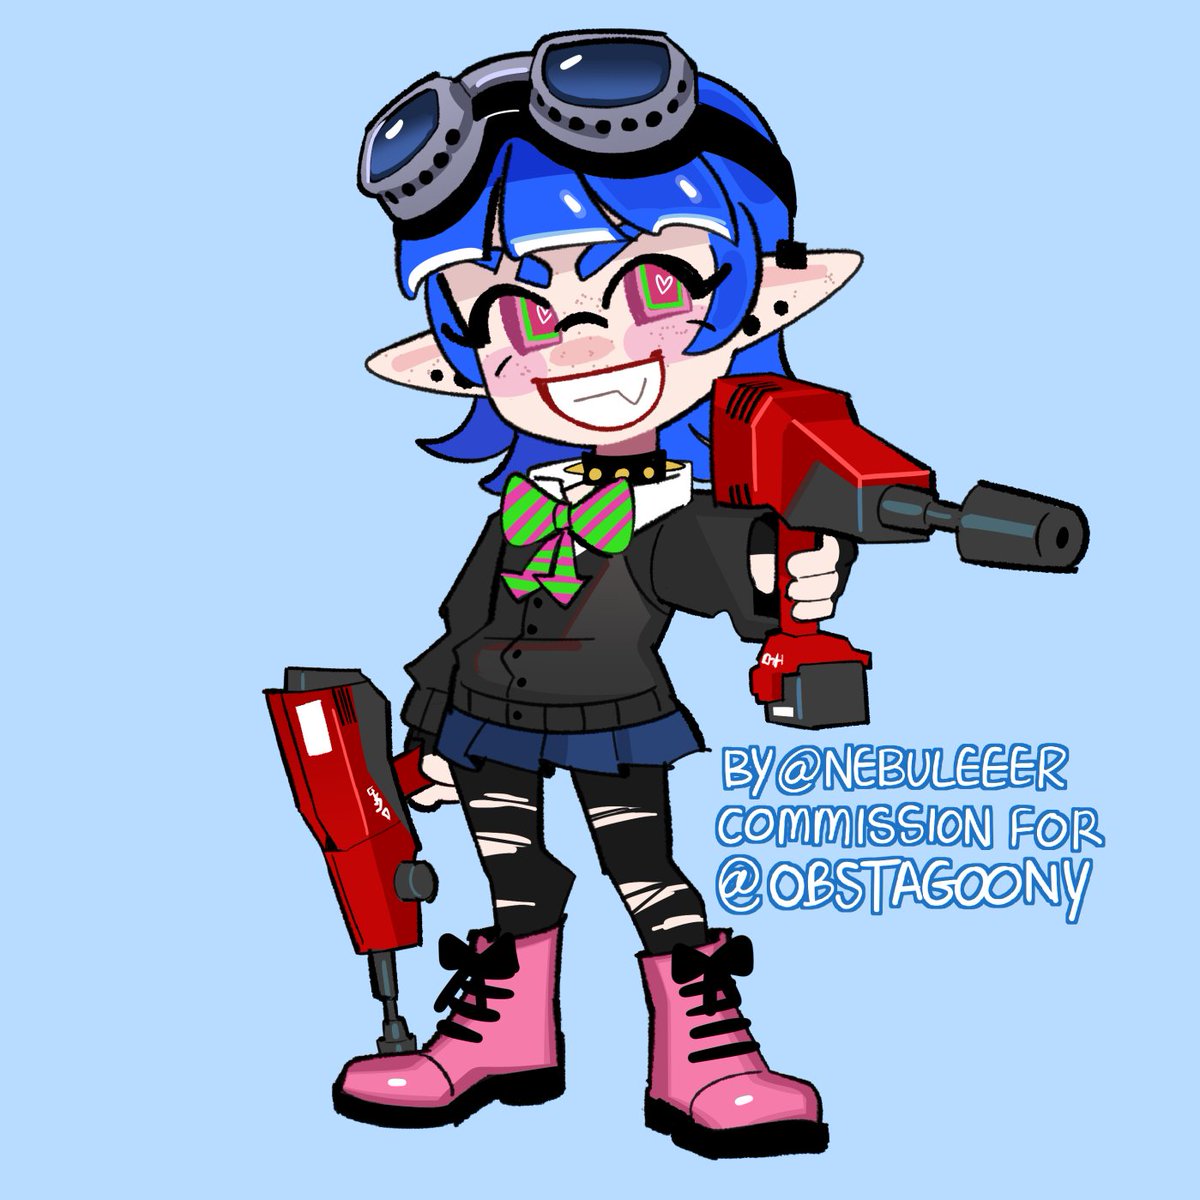 tadaaa some more chibi splatoon comms. i have a waitlist for them in my carrd for anyone interested hehe